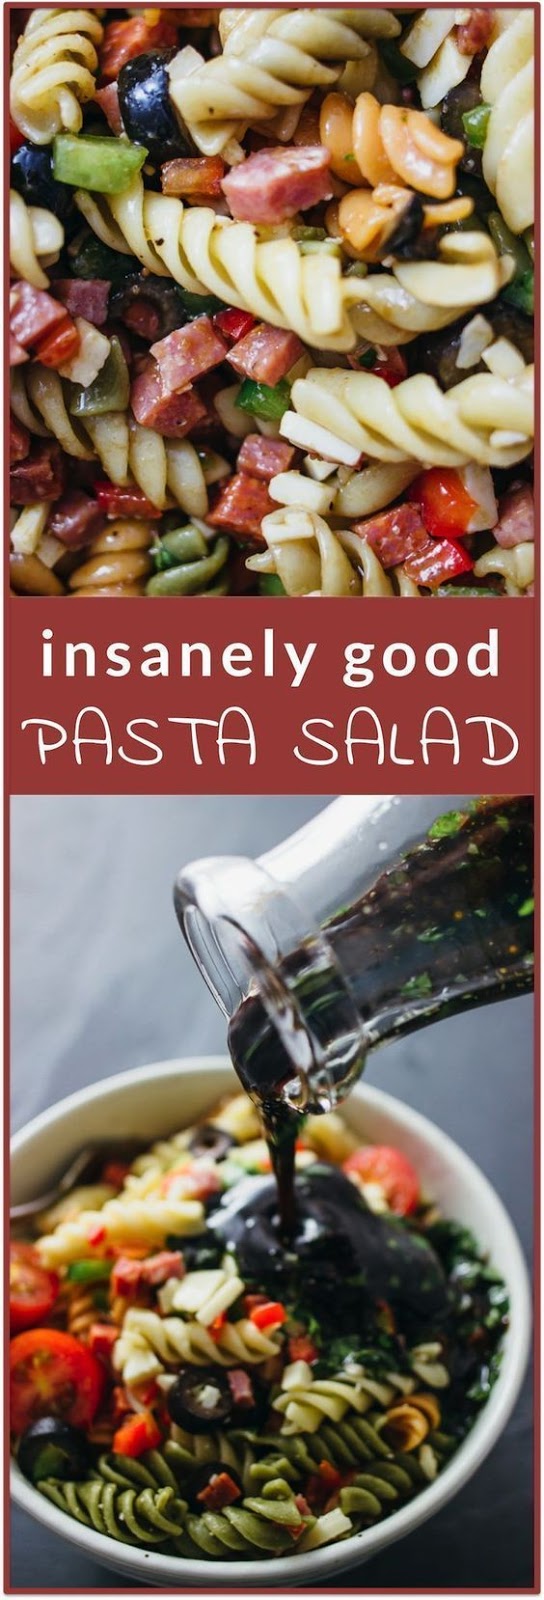 INSANELY GOOD PASTA SALAD WITH ITALIAN DRESSING - FOODIE